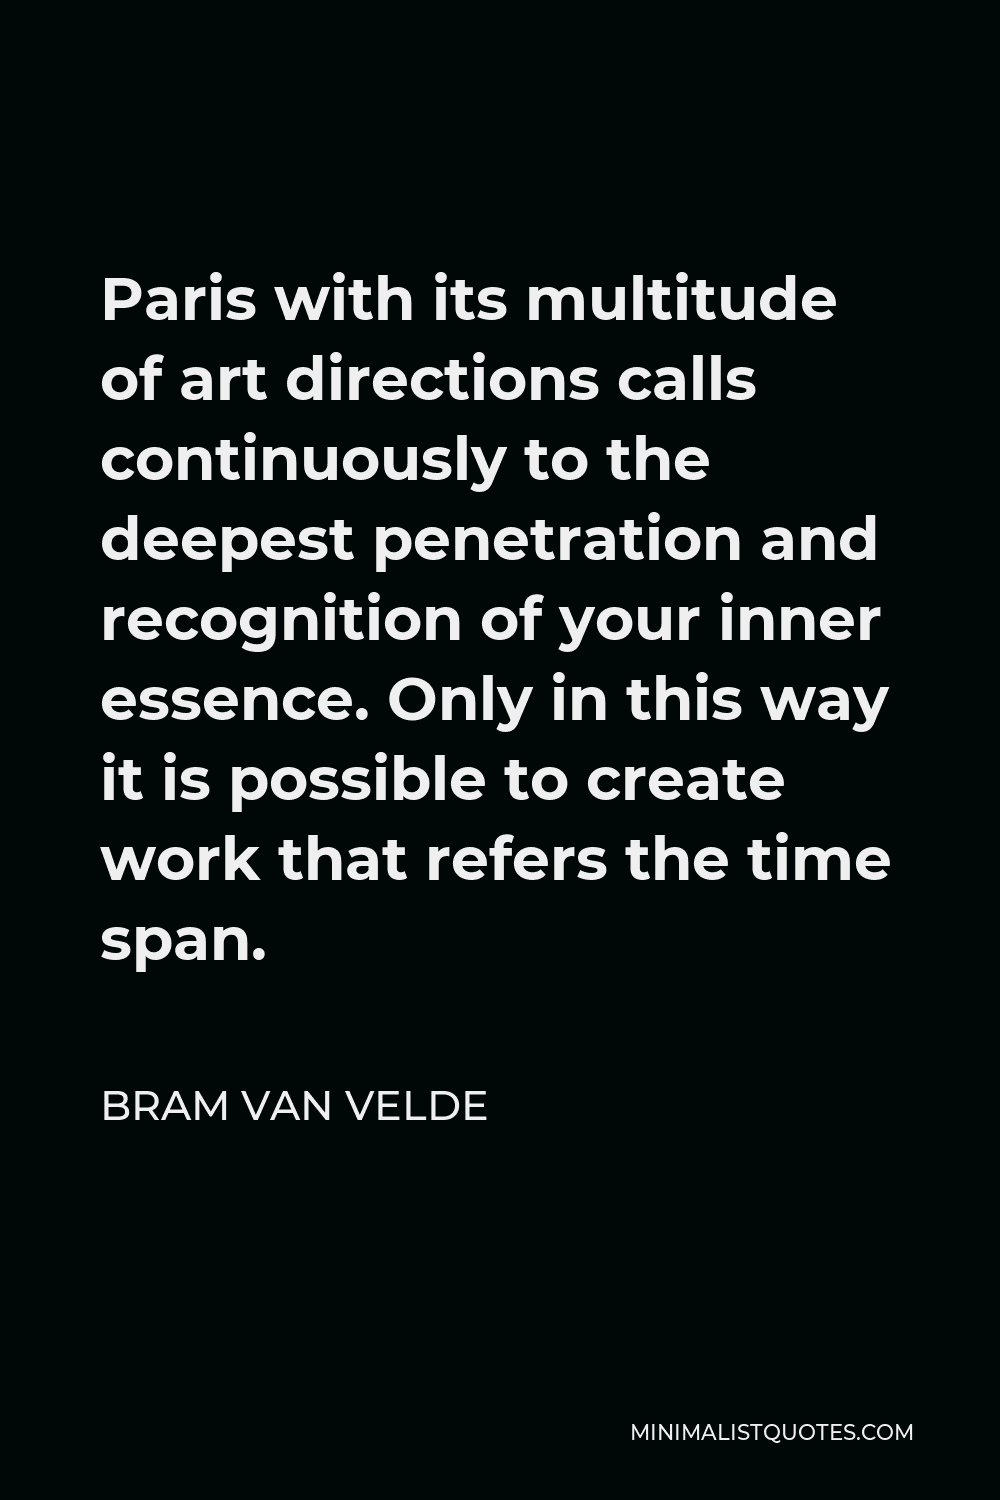 Bram van Velde Quote - Paris with its multitude of art directions calls continuously to the deepest penetration and recognition of your inner essence. Only in this way it is possible to create work that refers the time span.